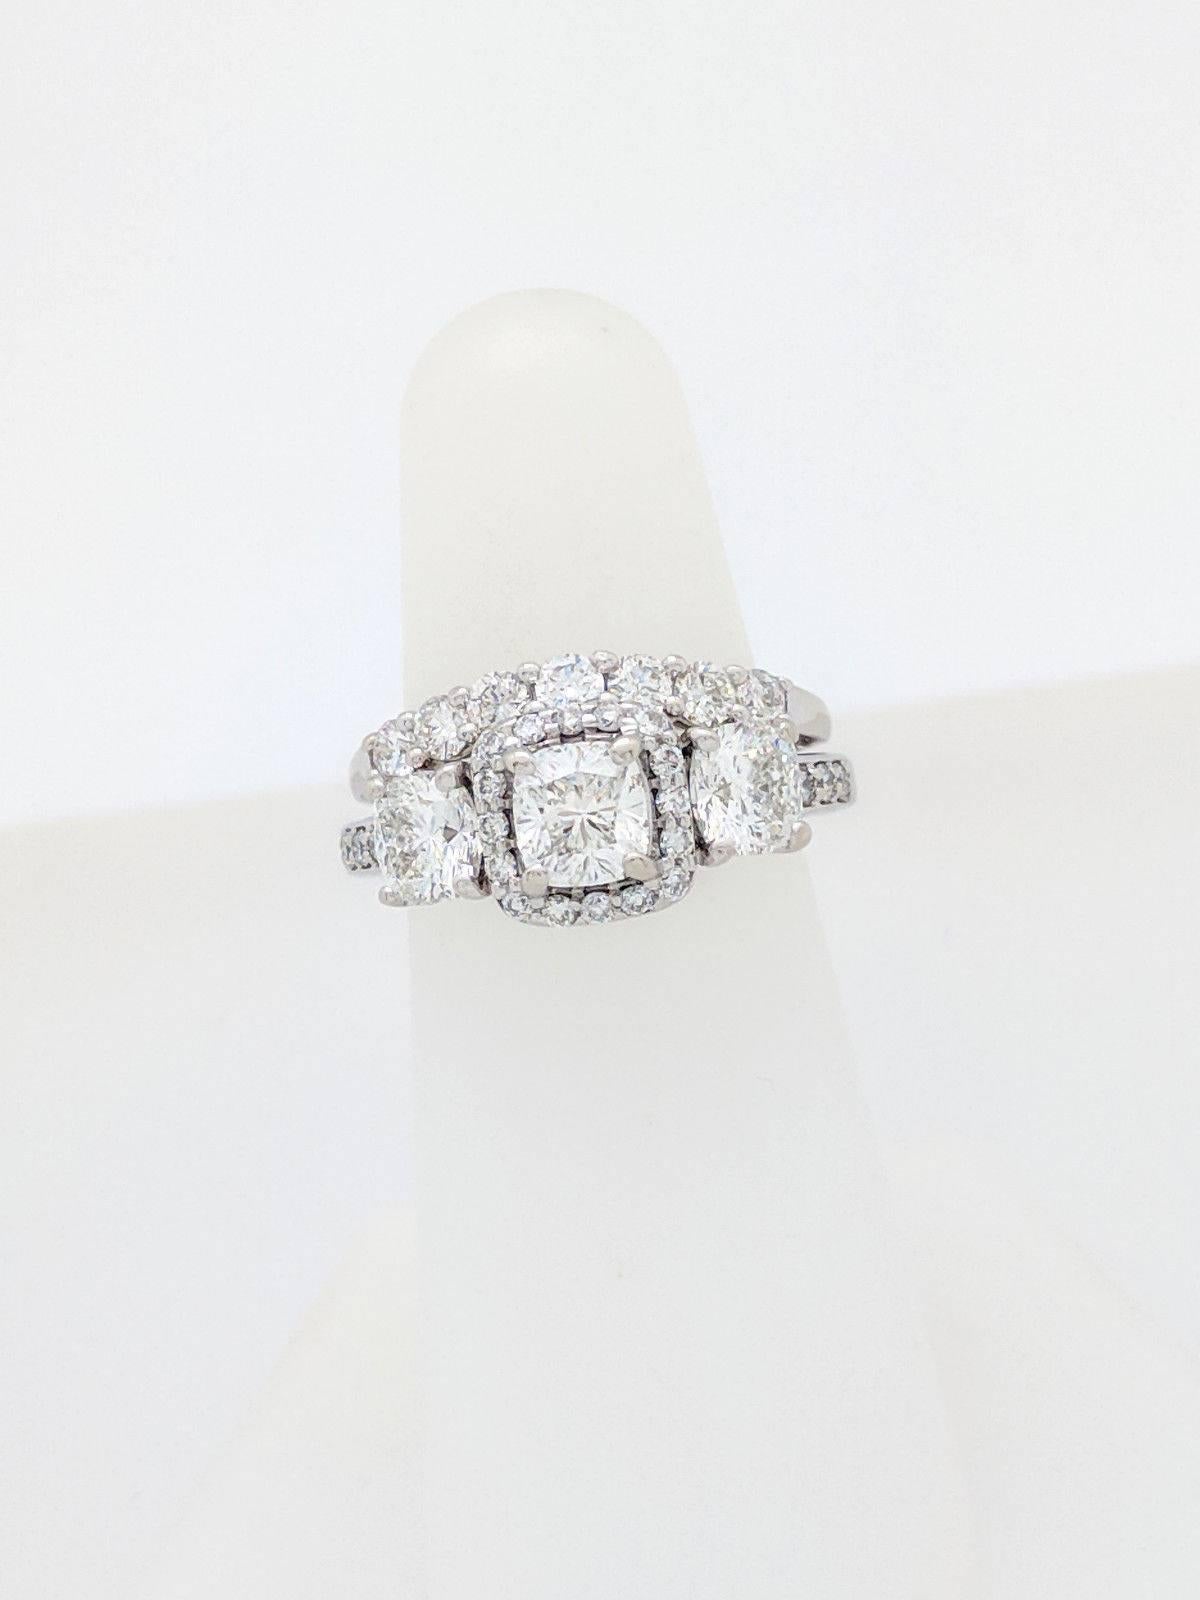 14K White Gold 3-Stone Cushion Cut 2.62ctw Diamond Halo Wedding Set IGI Cert.

You are viewing a beautiful IGI Certified 3-Stone Cushion Cut Diamond Wedding Set. The engagement ring features (1) .72ct natural cushion cut diamond with a diamond halo,